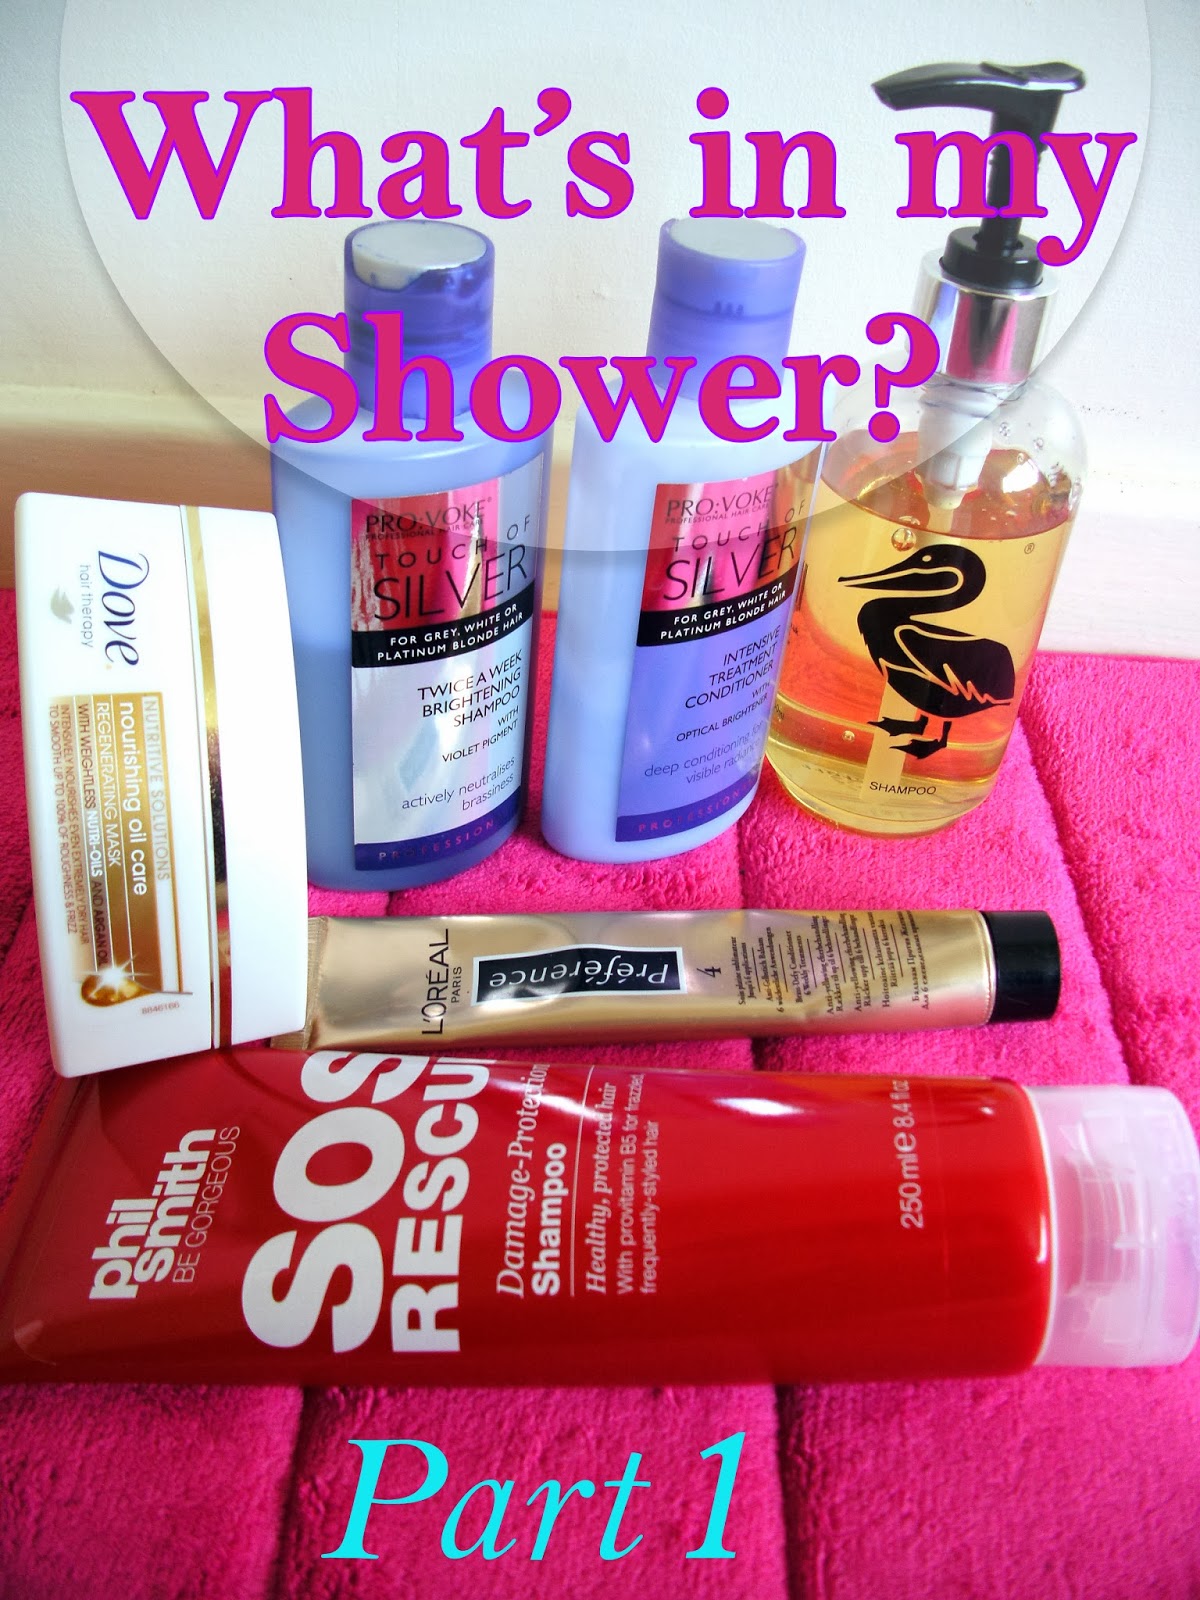 What's in my Shower - Dove Nourishing Oil Care Hair Mask, PRO:VOKE Touch of Silver Twice A Week Brightening Shampoo & Treatment Conditioner, Duck Island Mandarin & Bergamot Shampoo,  Phil Smith SOS Shampoo and L’Oreal Brass Defy Conditioner